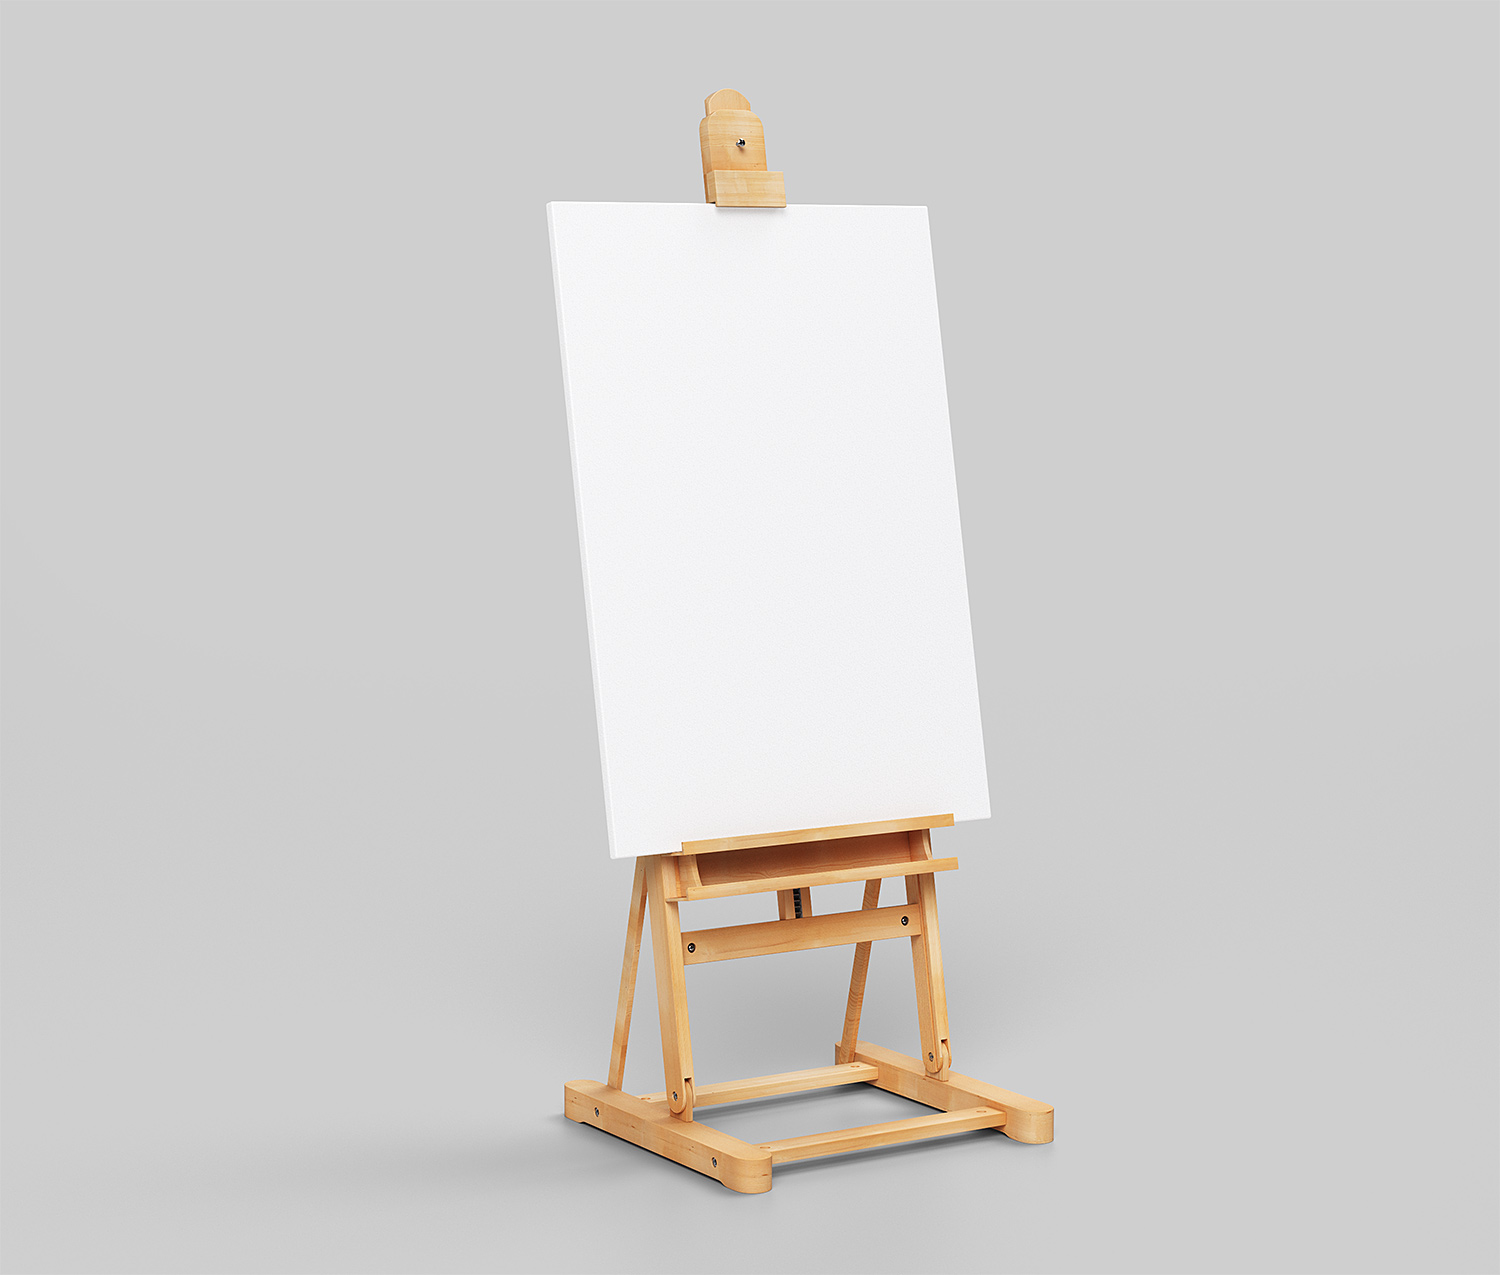 Canvas Poster on Easel Mockup Free